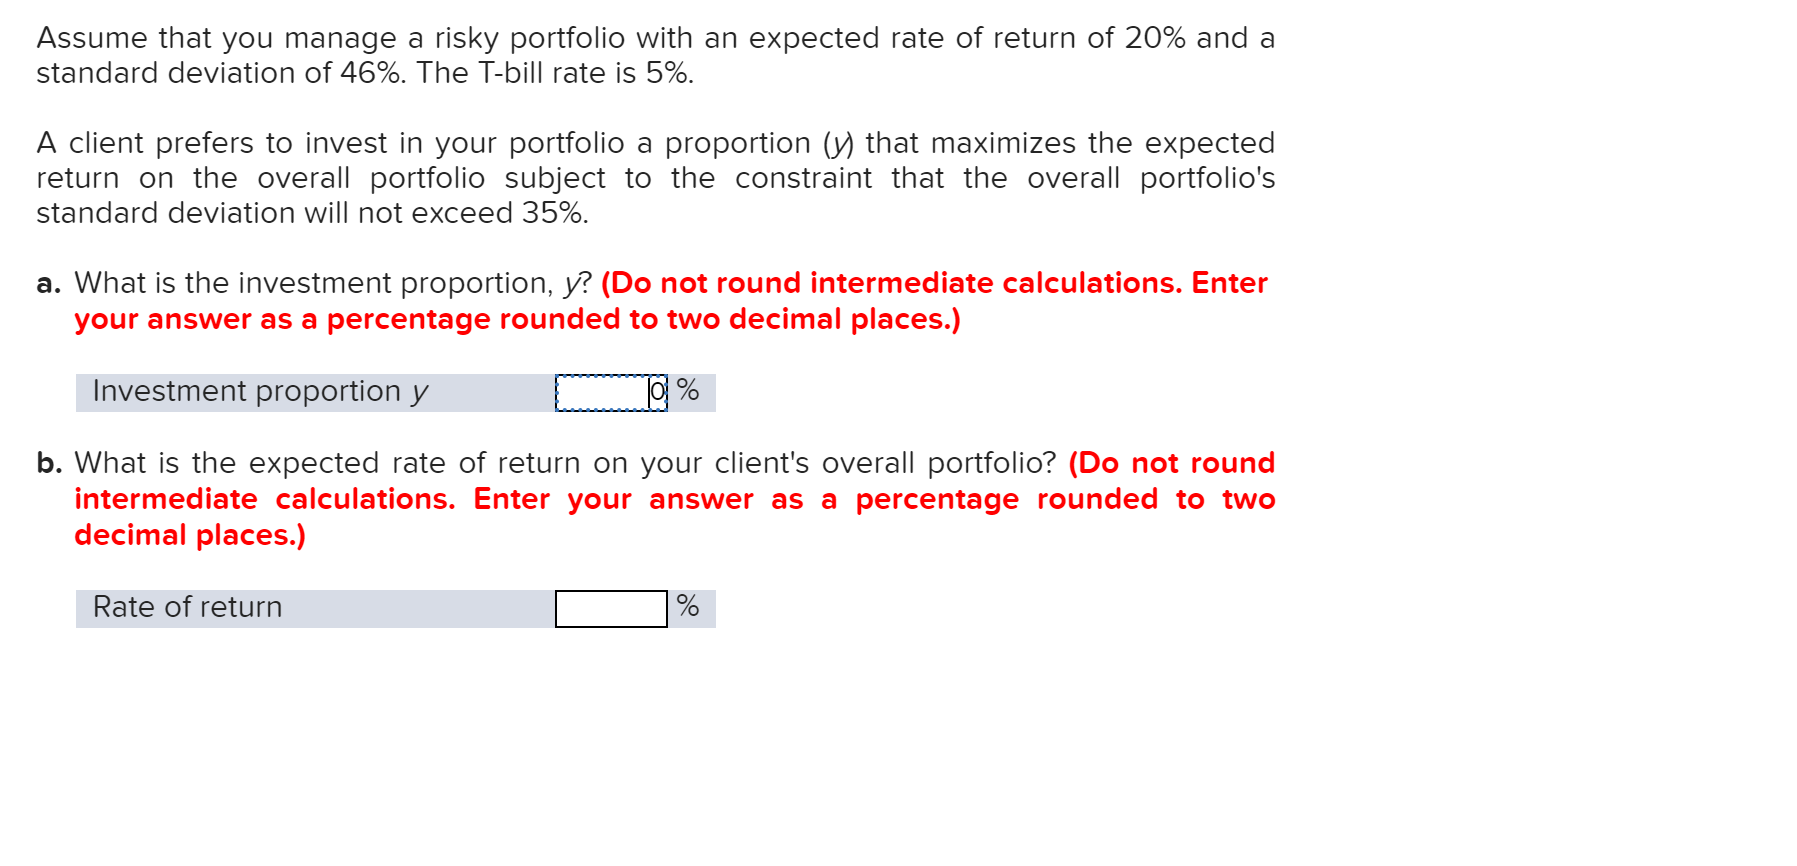 Assume that you manage a risky portfolio with an expected rate of return of 20% and a
standard deviation of 46%. The T-bill rate is 5%.
A client prefers to invest in your portfolio a proportion (y) that maximizes the expected
return on the overall portfolio subject to the constraint that the overall portfolio's
standard deviation will not exceed 35%
a. What is the investment proportion, y? (Do not round intermediate calculations. Enter
your answer as a percentage rounded to two decimal places.)
Investment proportion y
b. What is the expected ra
intermediate calculations. Enter your answer as a percentage rounded to two
decimal places.)
of return on your client's overall portfolio? (Do not roun
Rate of return
